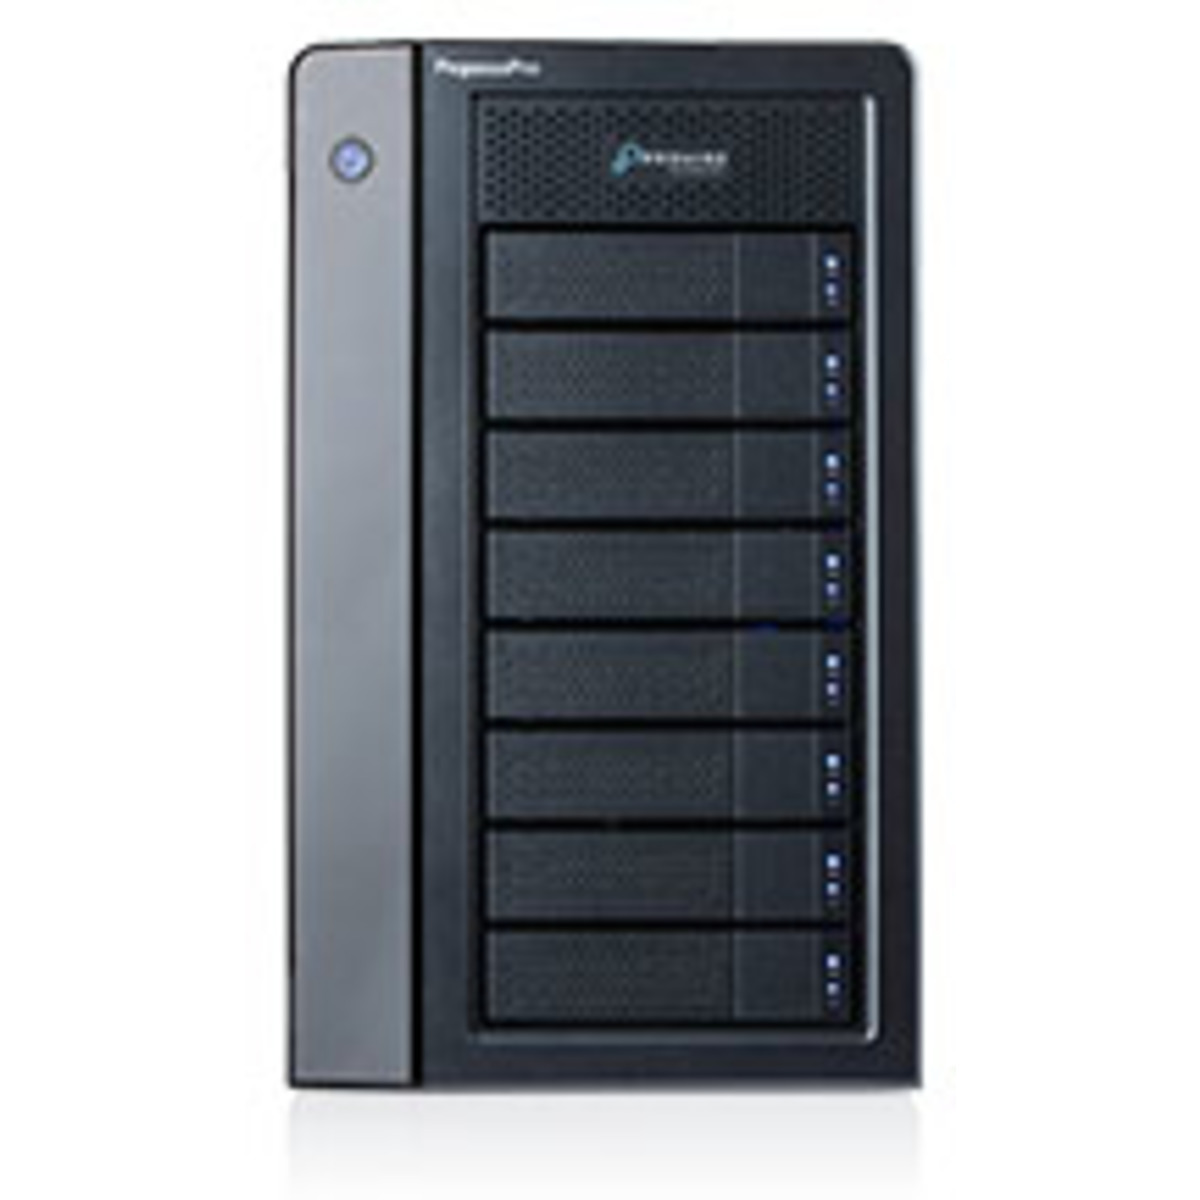 buy Promise Technology PegasusPro R8 32tb Desktop DAS-NAS - Combo Direct + Network Storage Device 8x4000gb Samsung 870 EVO MZ-77E4T0BAM 2.5 560/530MB/s SATA 6Gb/s SSD CONSUMER Class Drives Installed - Burn-In Tested - nas headquarters buy network attached storage server device das new raid-5 free shipping simply usa PegasusPro R8